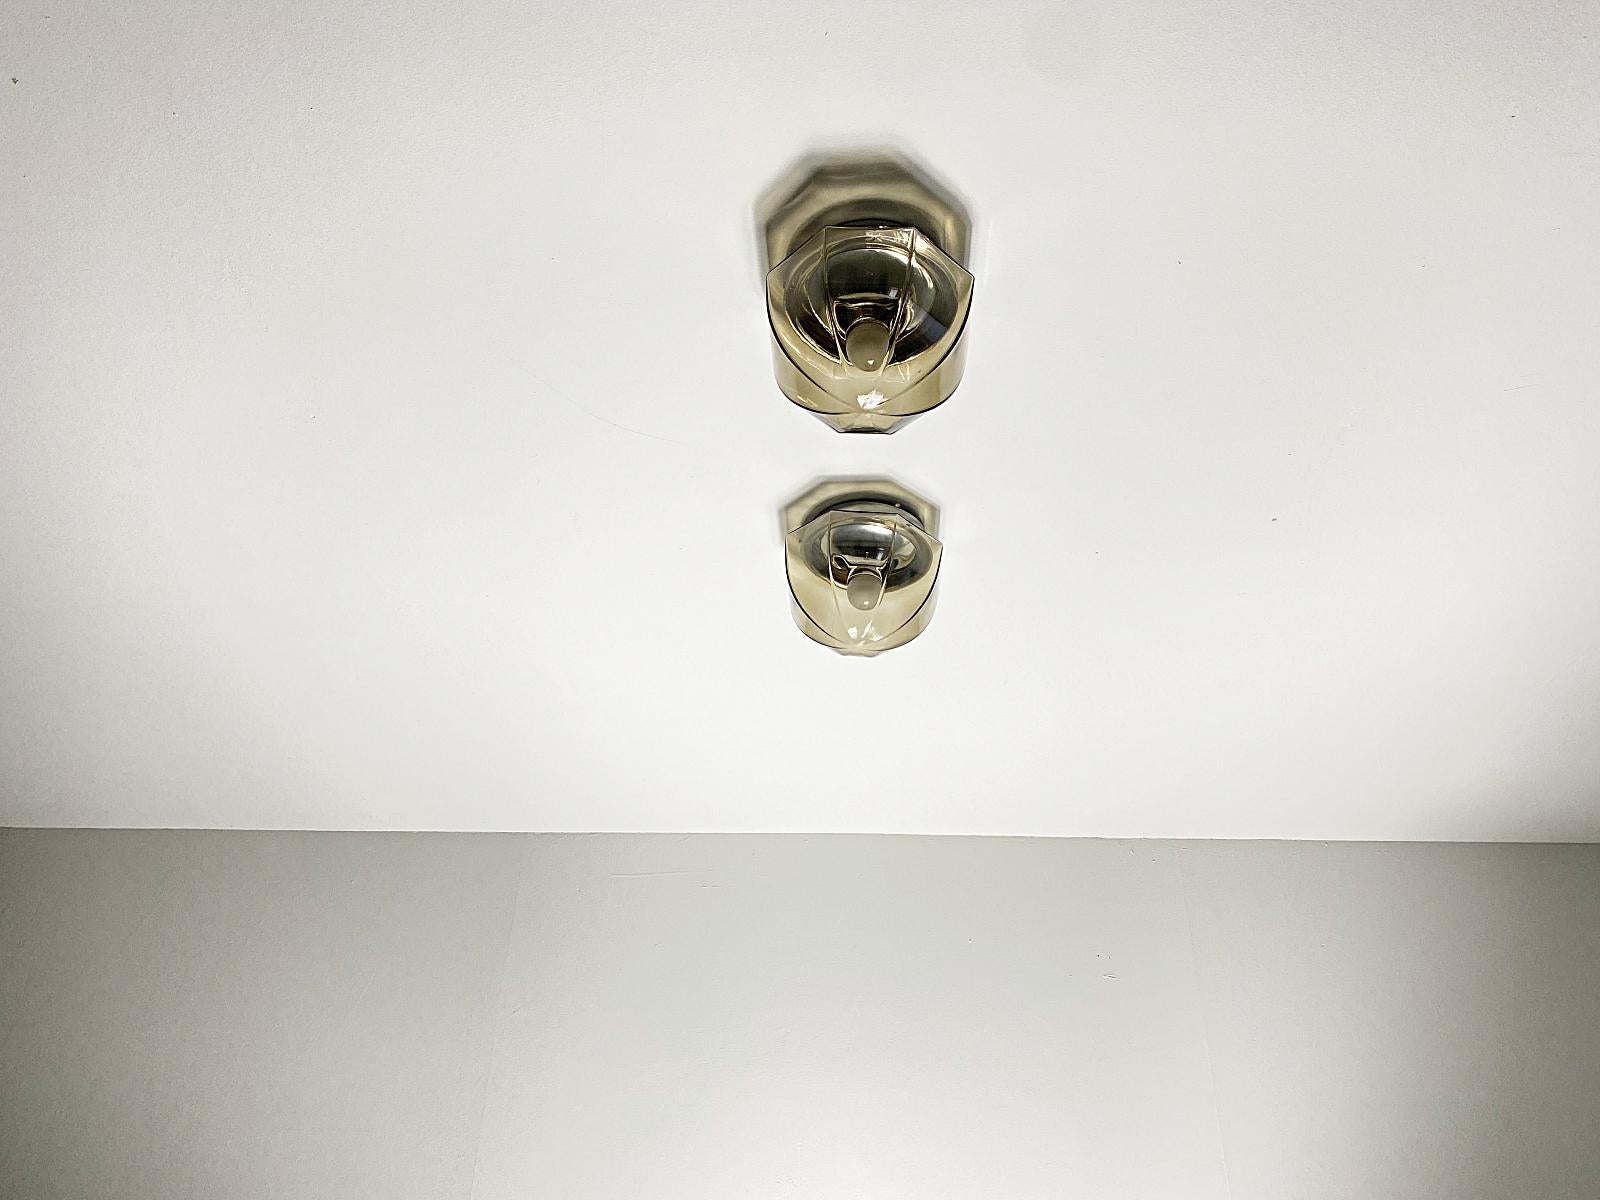 Hand-Crafted Hillebrand Chrome & Smoked Glass Sconce Flush Mount Lights, 1970s, Germany For Sale